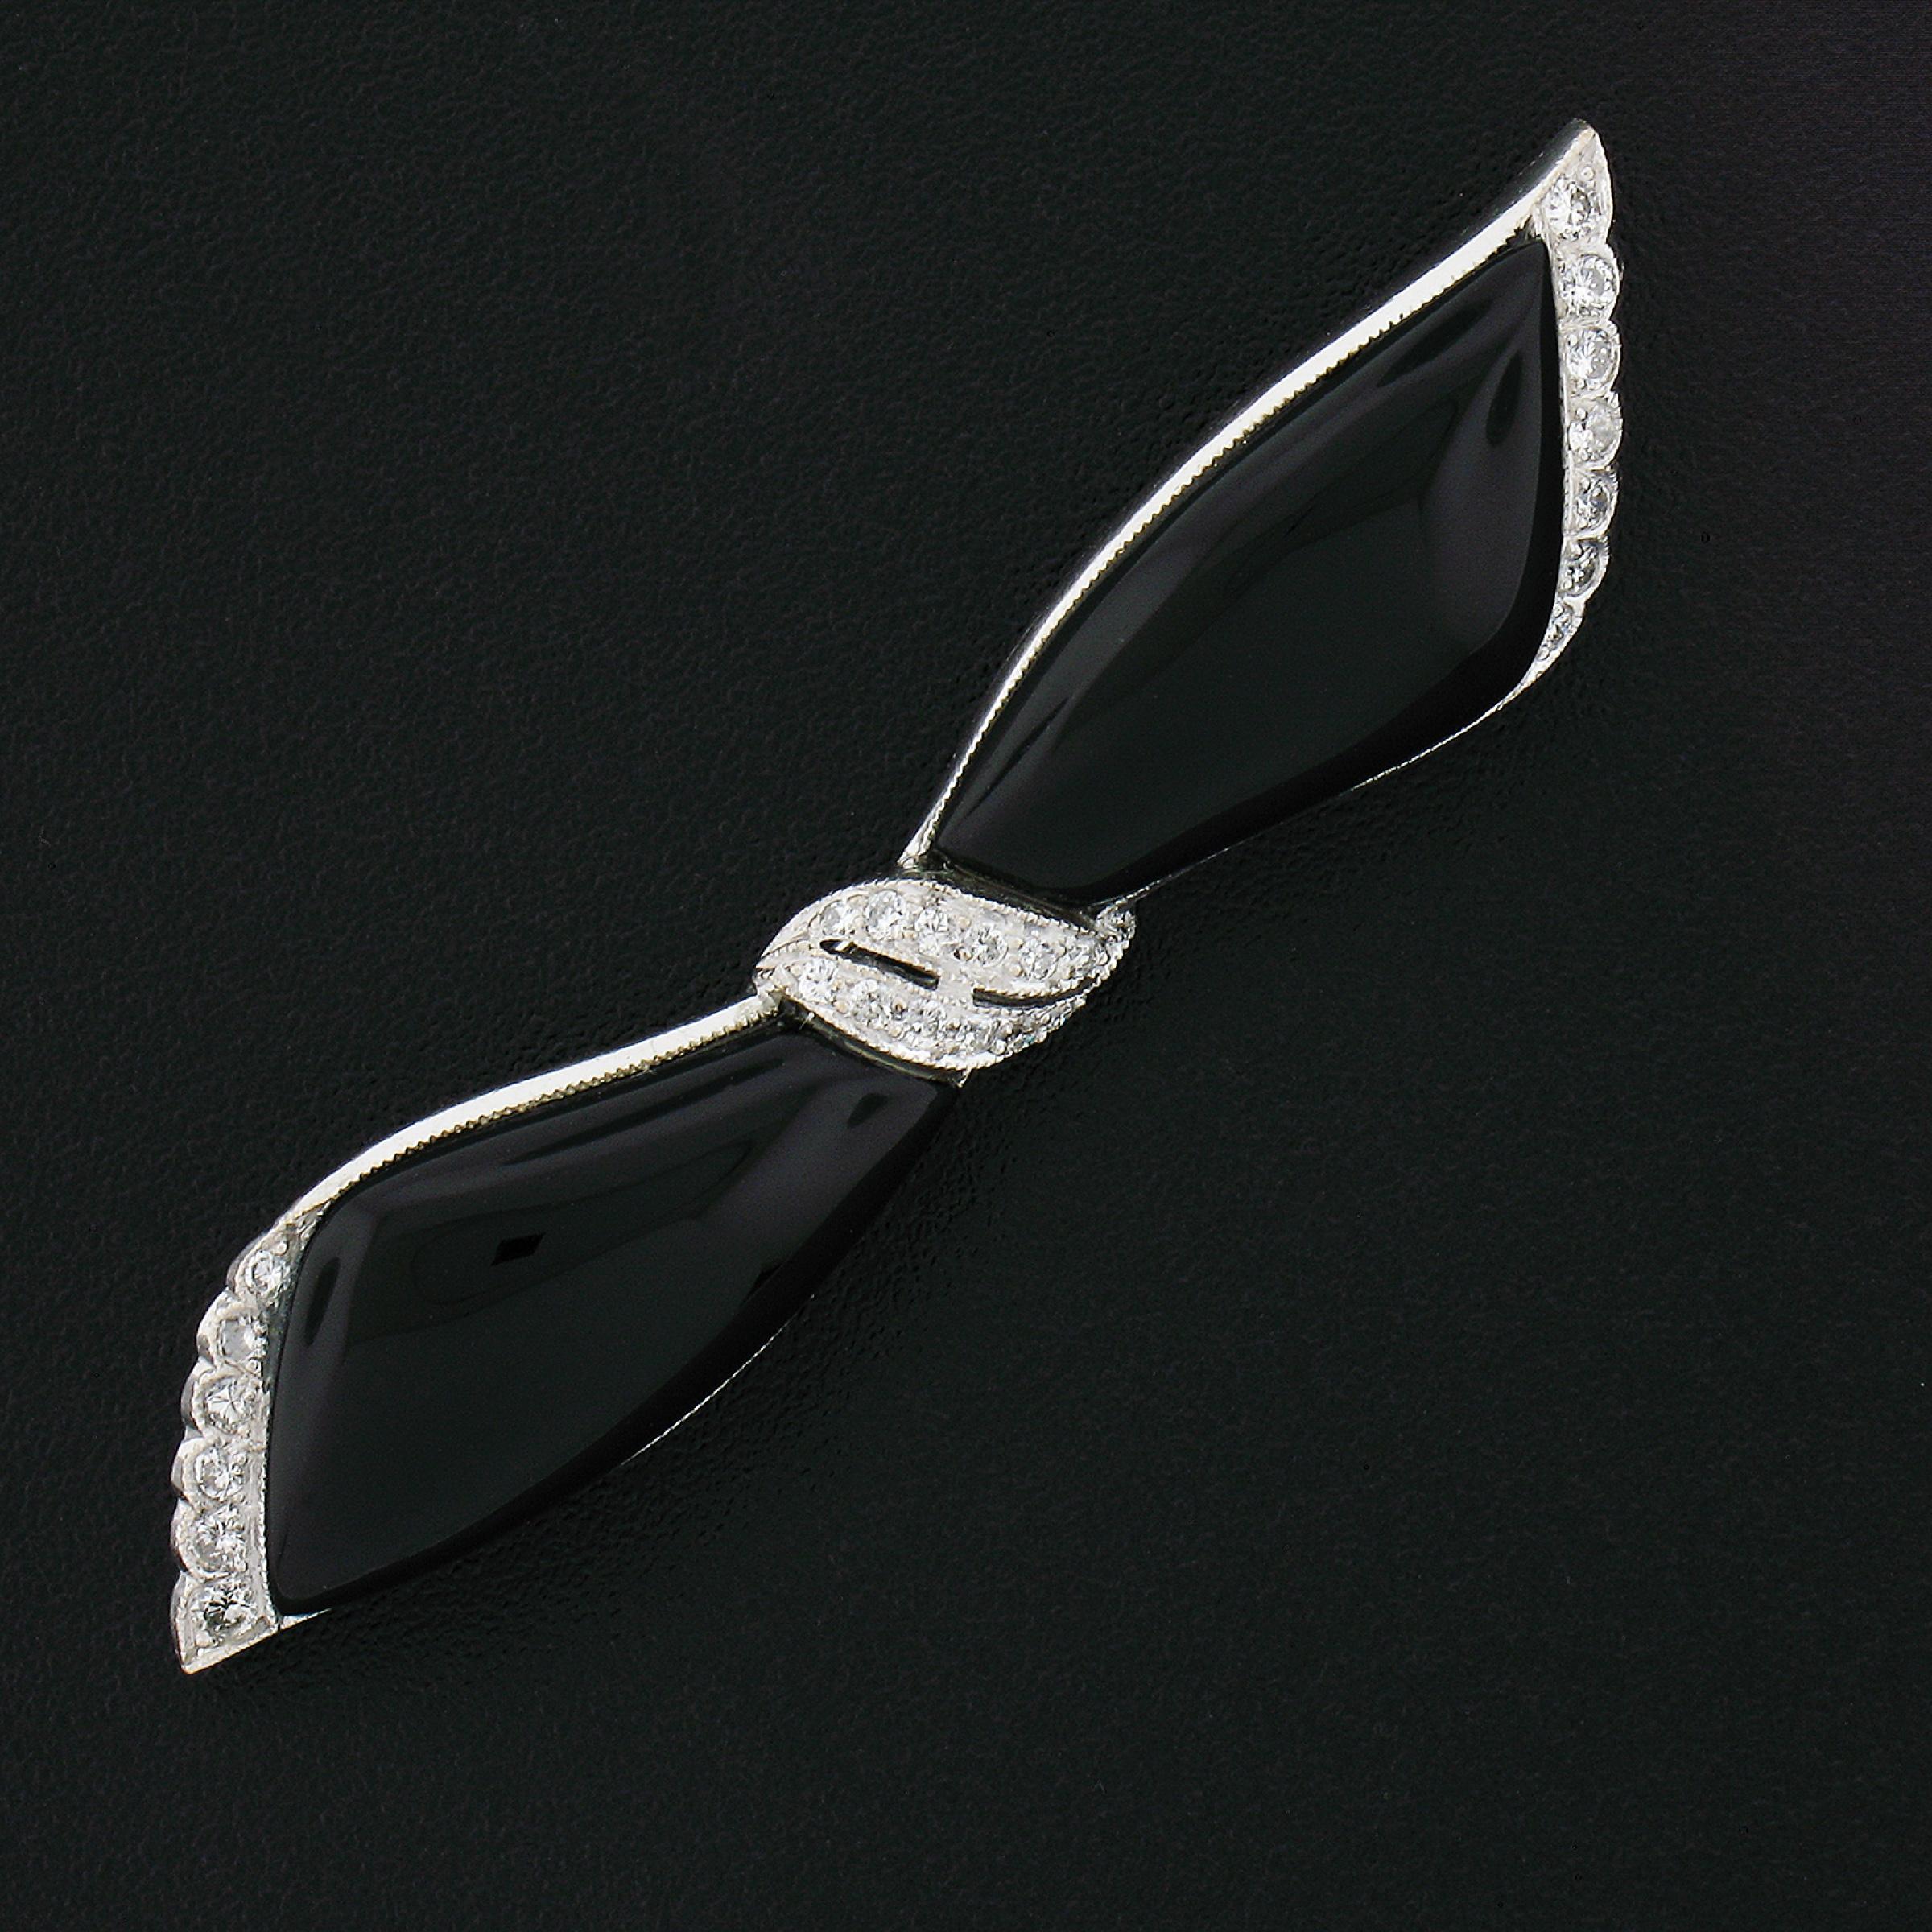 This super cute vintage pin/brooch was crafted in solid 18k white gold. It features an adorable bow design that is adorned with custom cut polished black onyx and accented with round brilliant cut diamonds that are pave set on the edges and center